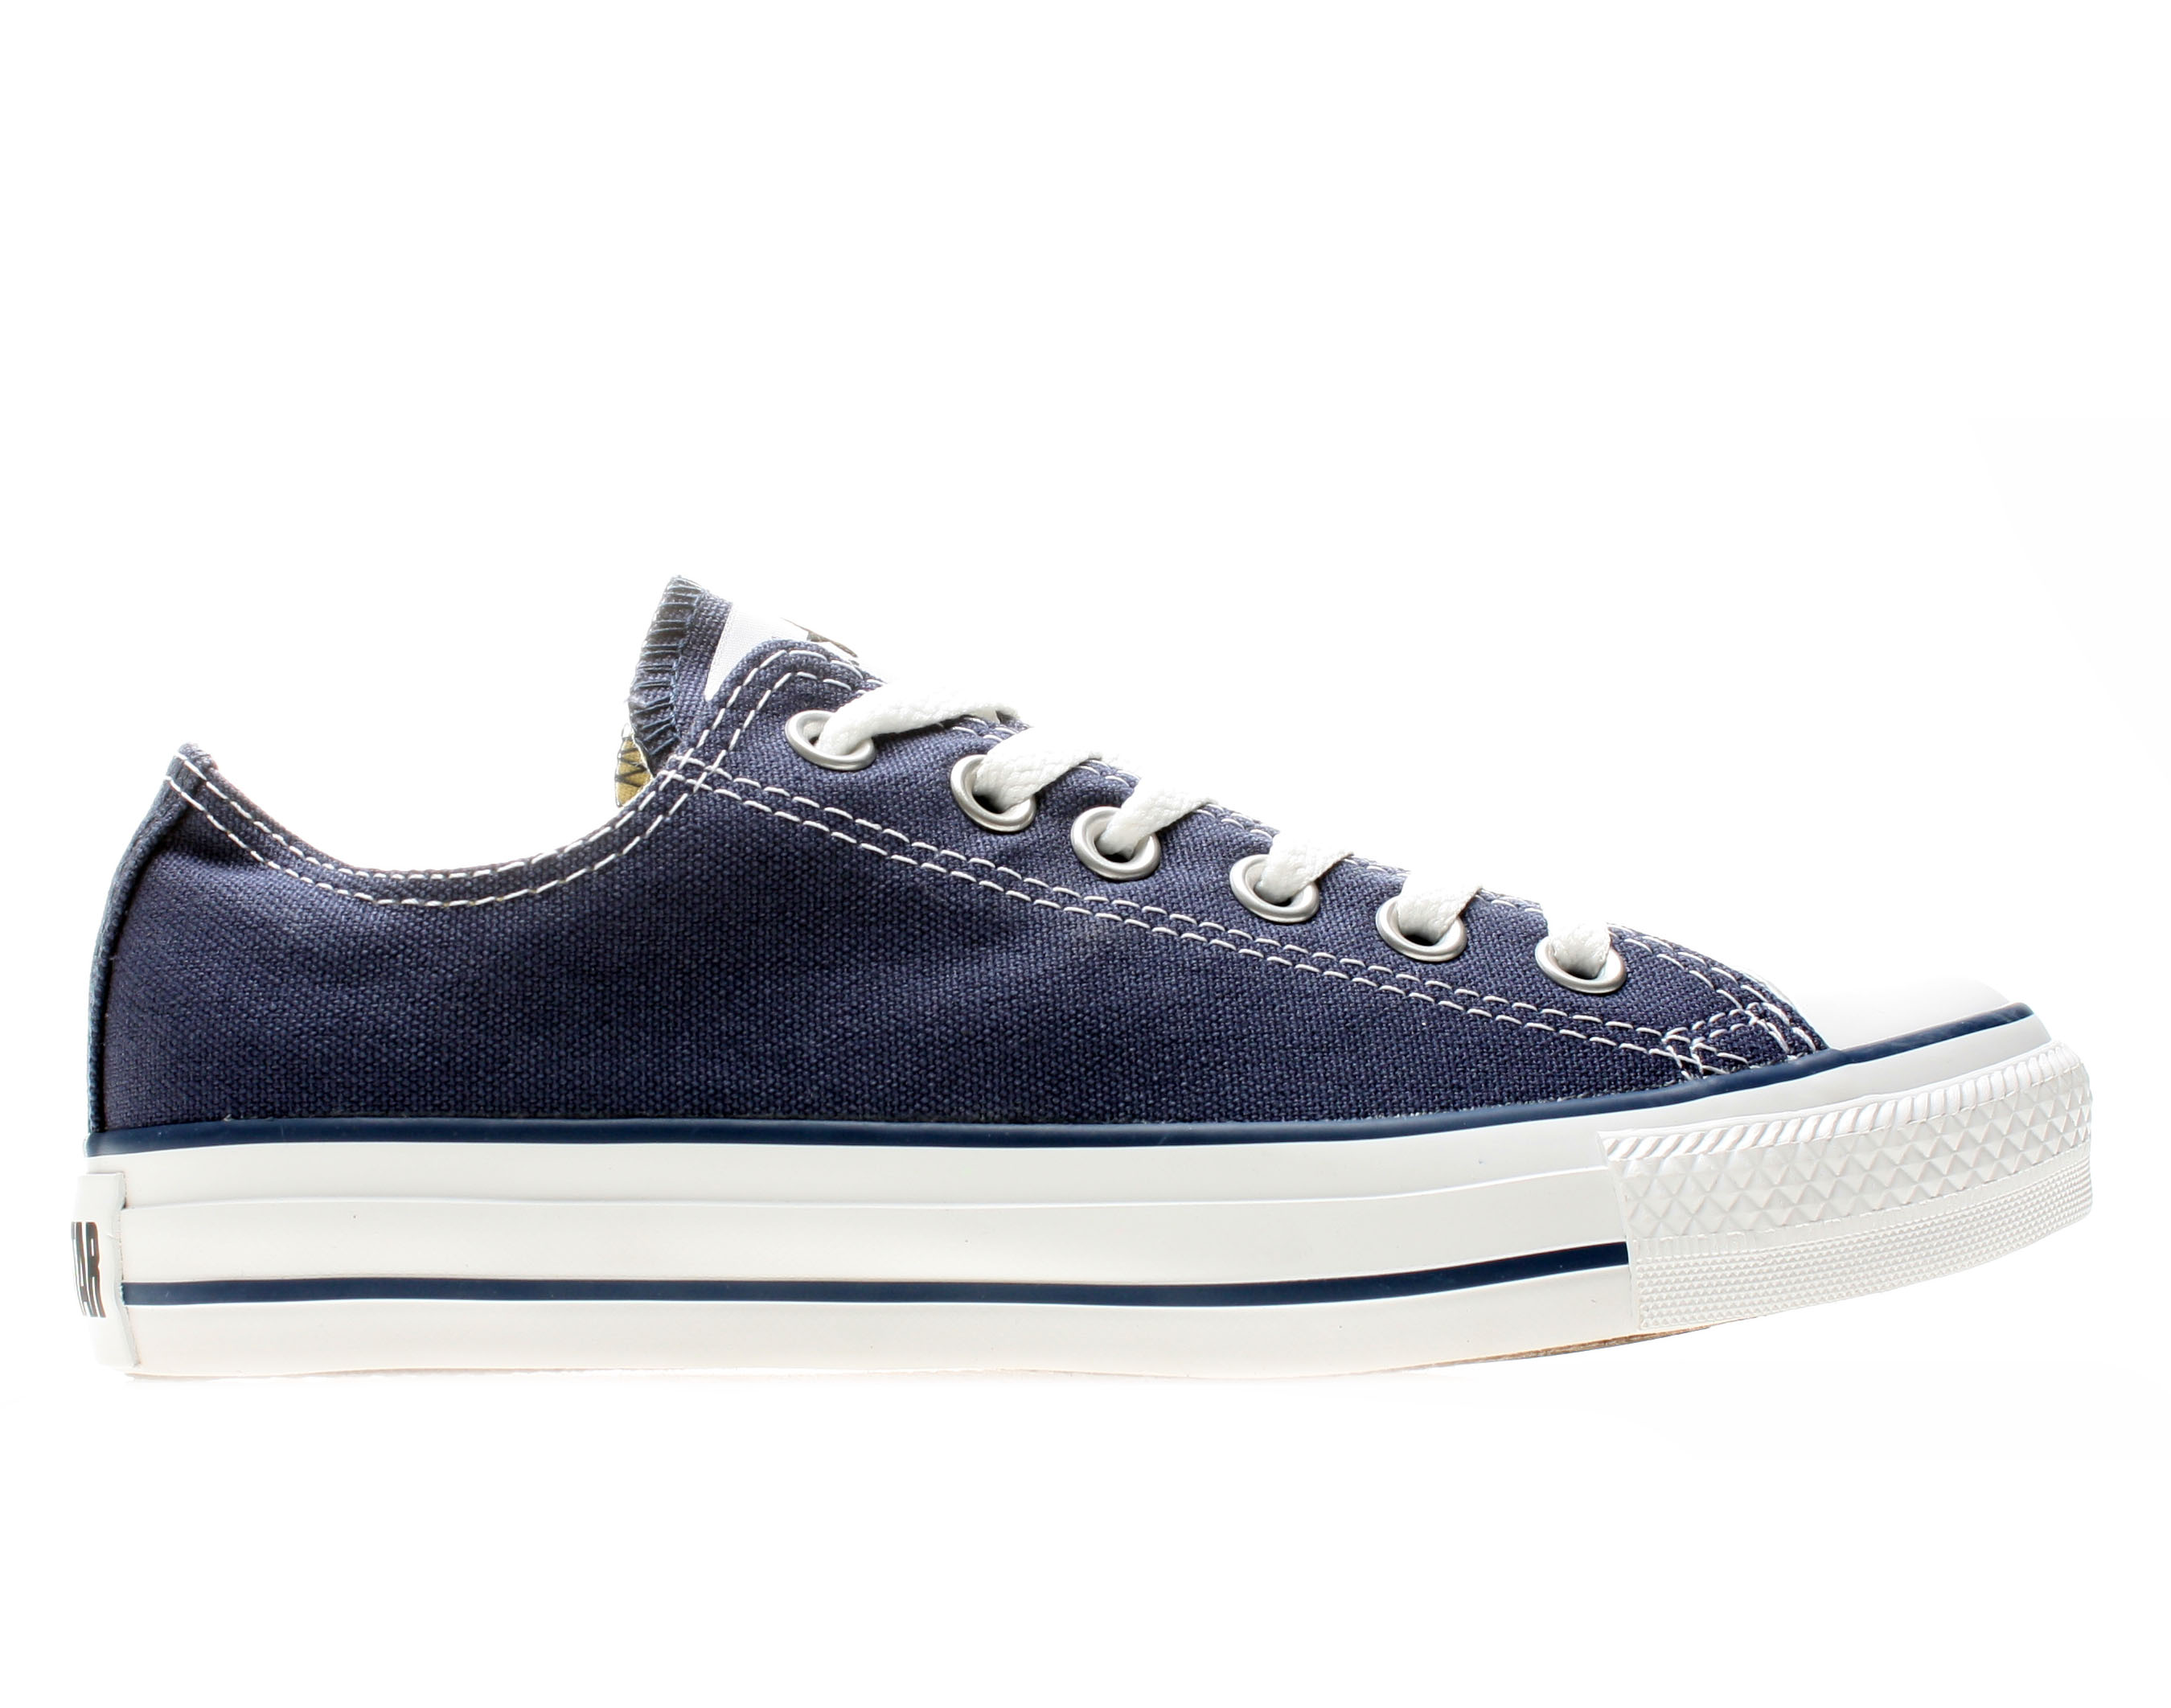 CONVERSE ALL STAR CHUCK TAYLOR LOW MEN'S NAVY M9697 - image 2 of 6